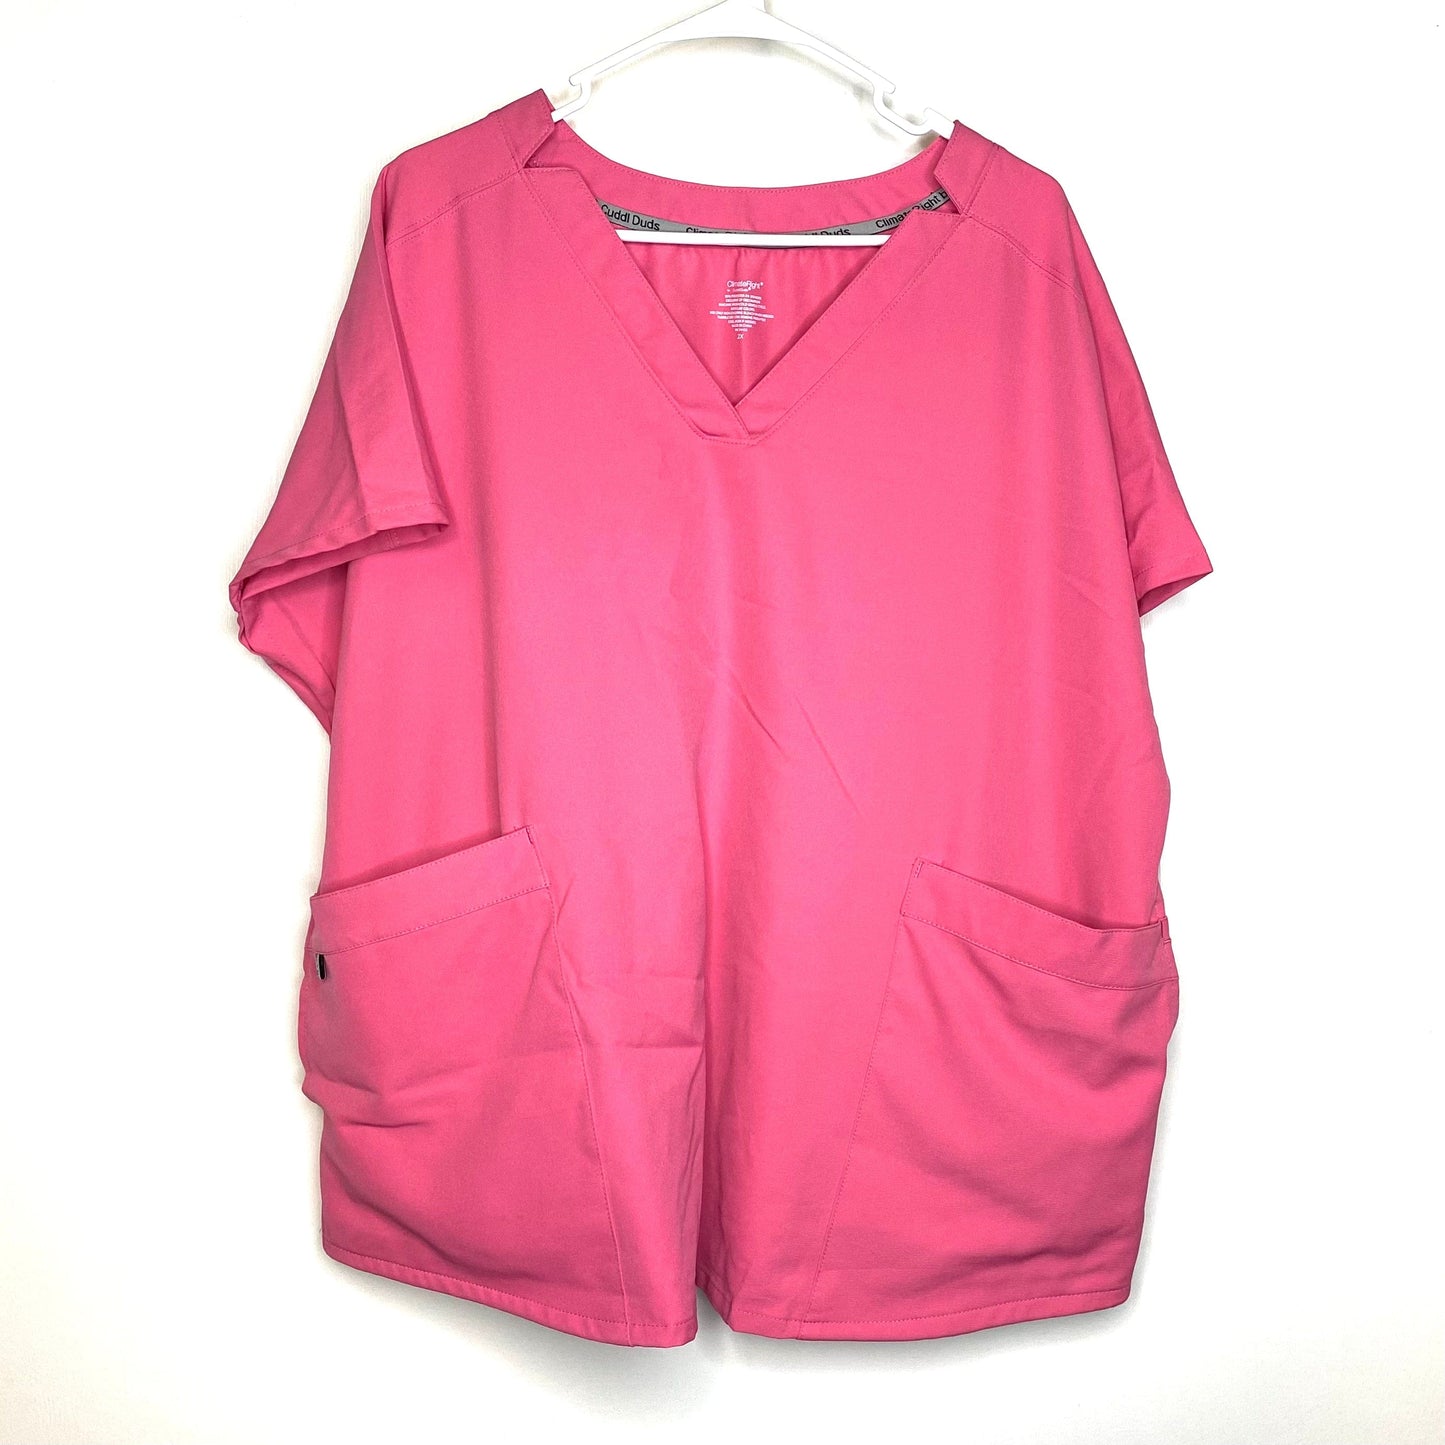 ClimateRight by Cuddl Duds Womens Size 2X Pink Scrubs Top NWT